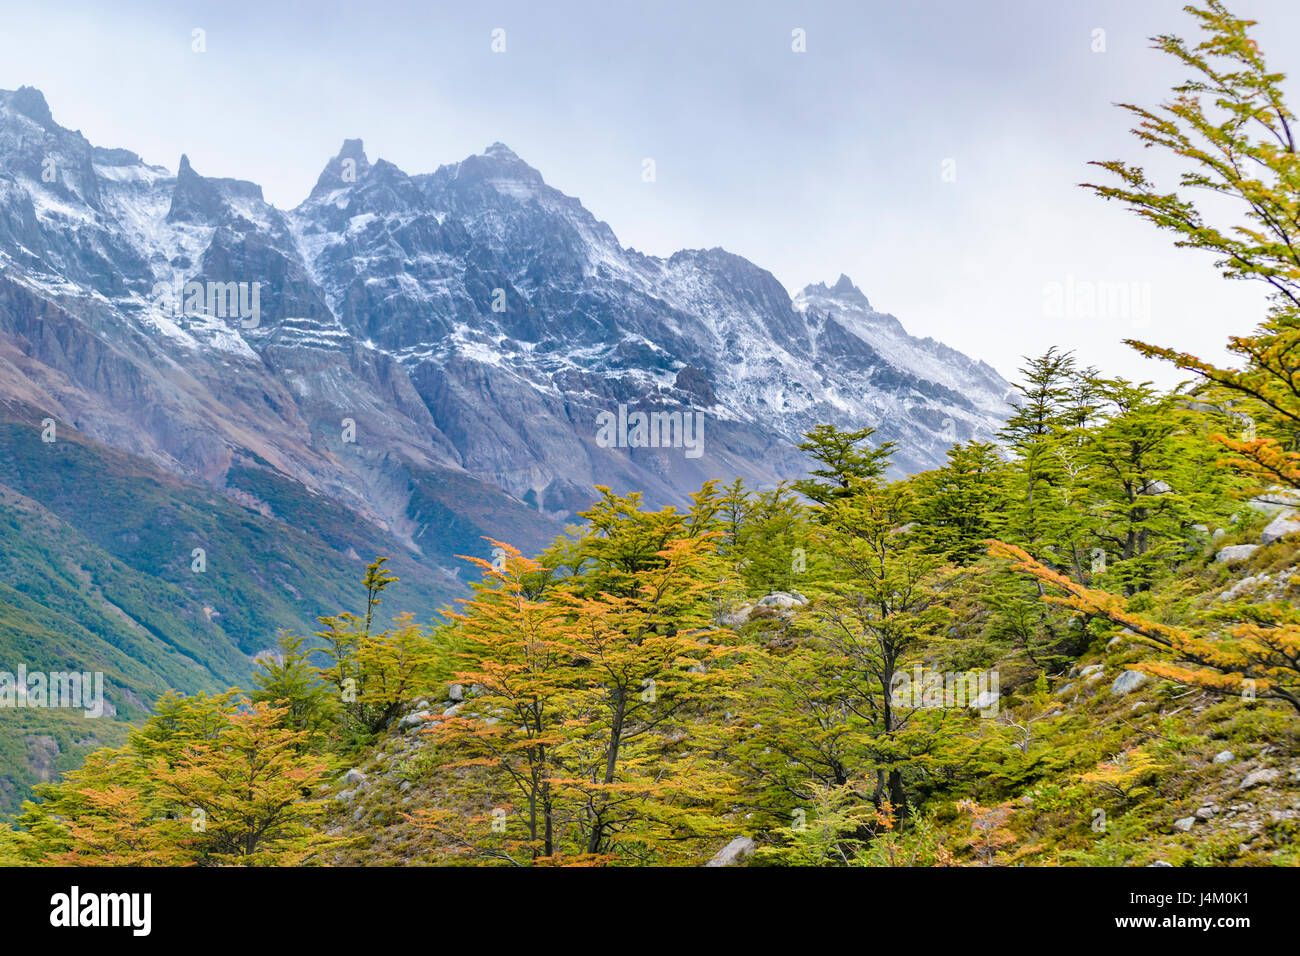 Patagonia landscape scene with snowy andes range mountains as main subject, El Chalten, Argentina Stock Photo